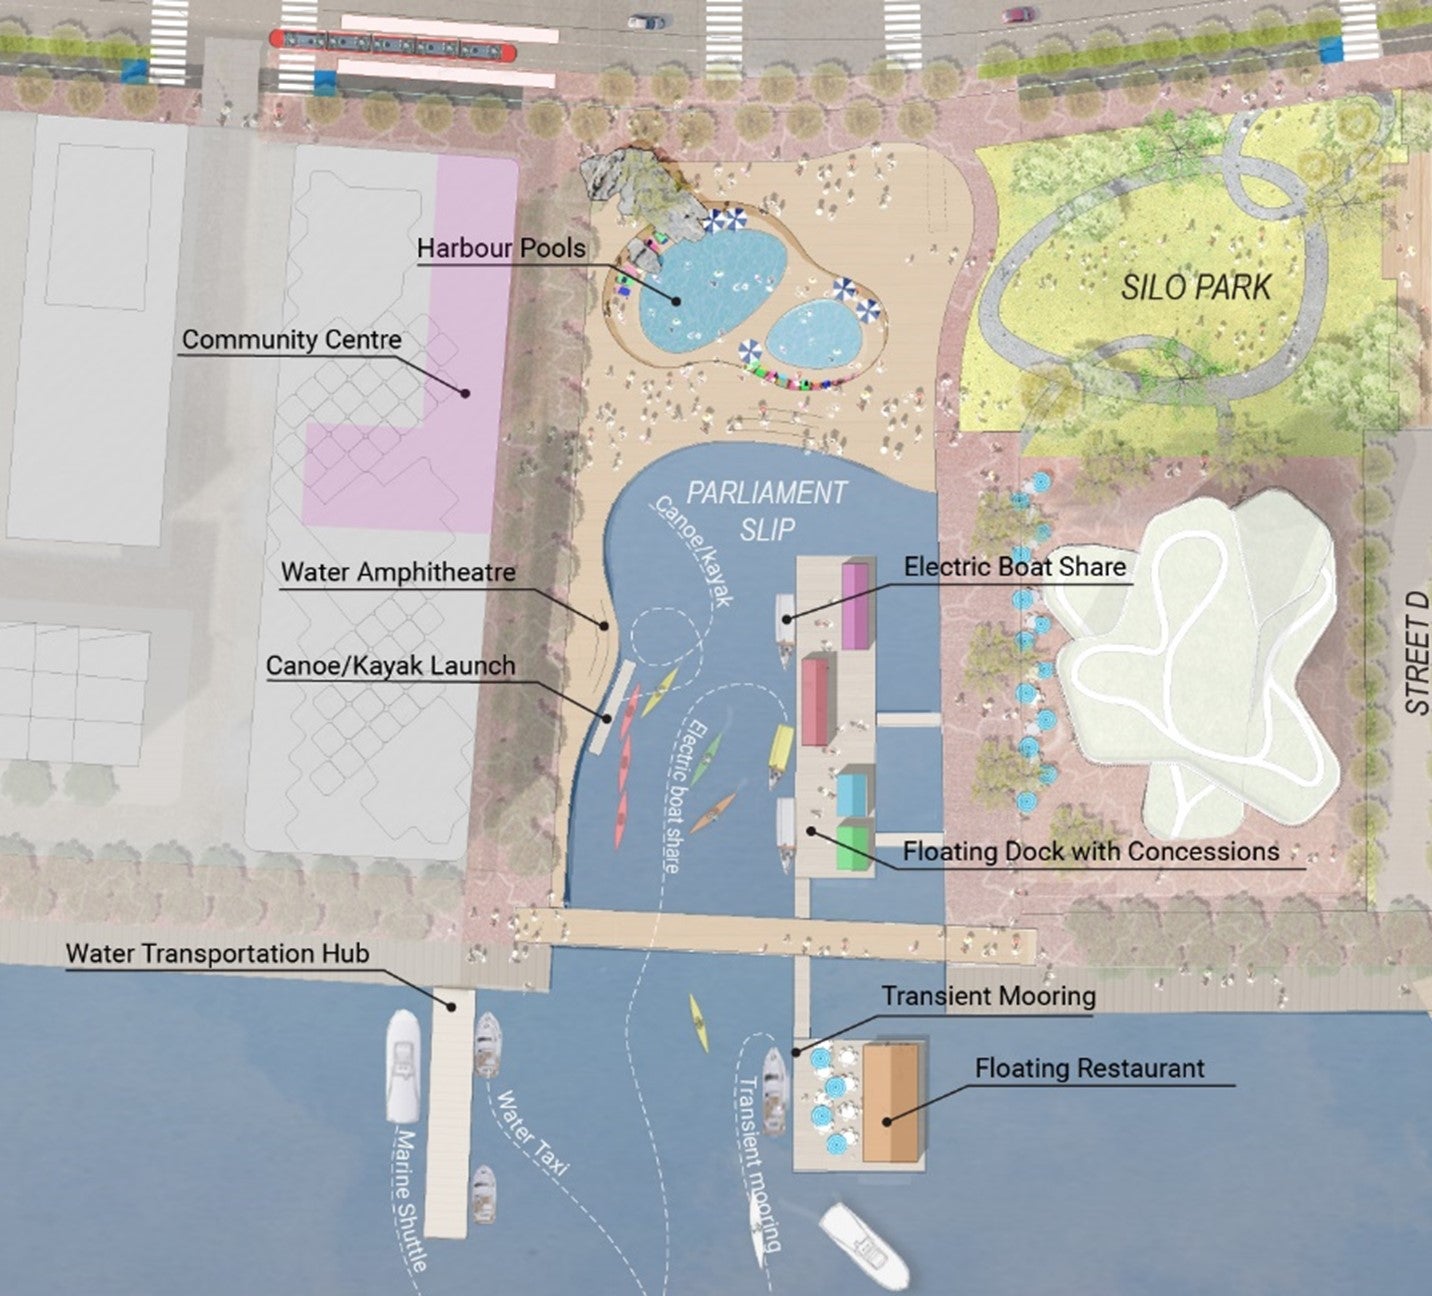 A diagram showing the features of the Parliament Slip - (1) Harbour Pools (2) WaveDeck and Canoe/Kayak Launch (3) Water Transportation Pier (4) Floating Dock